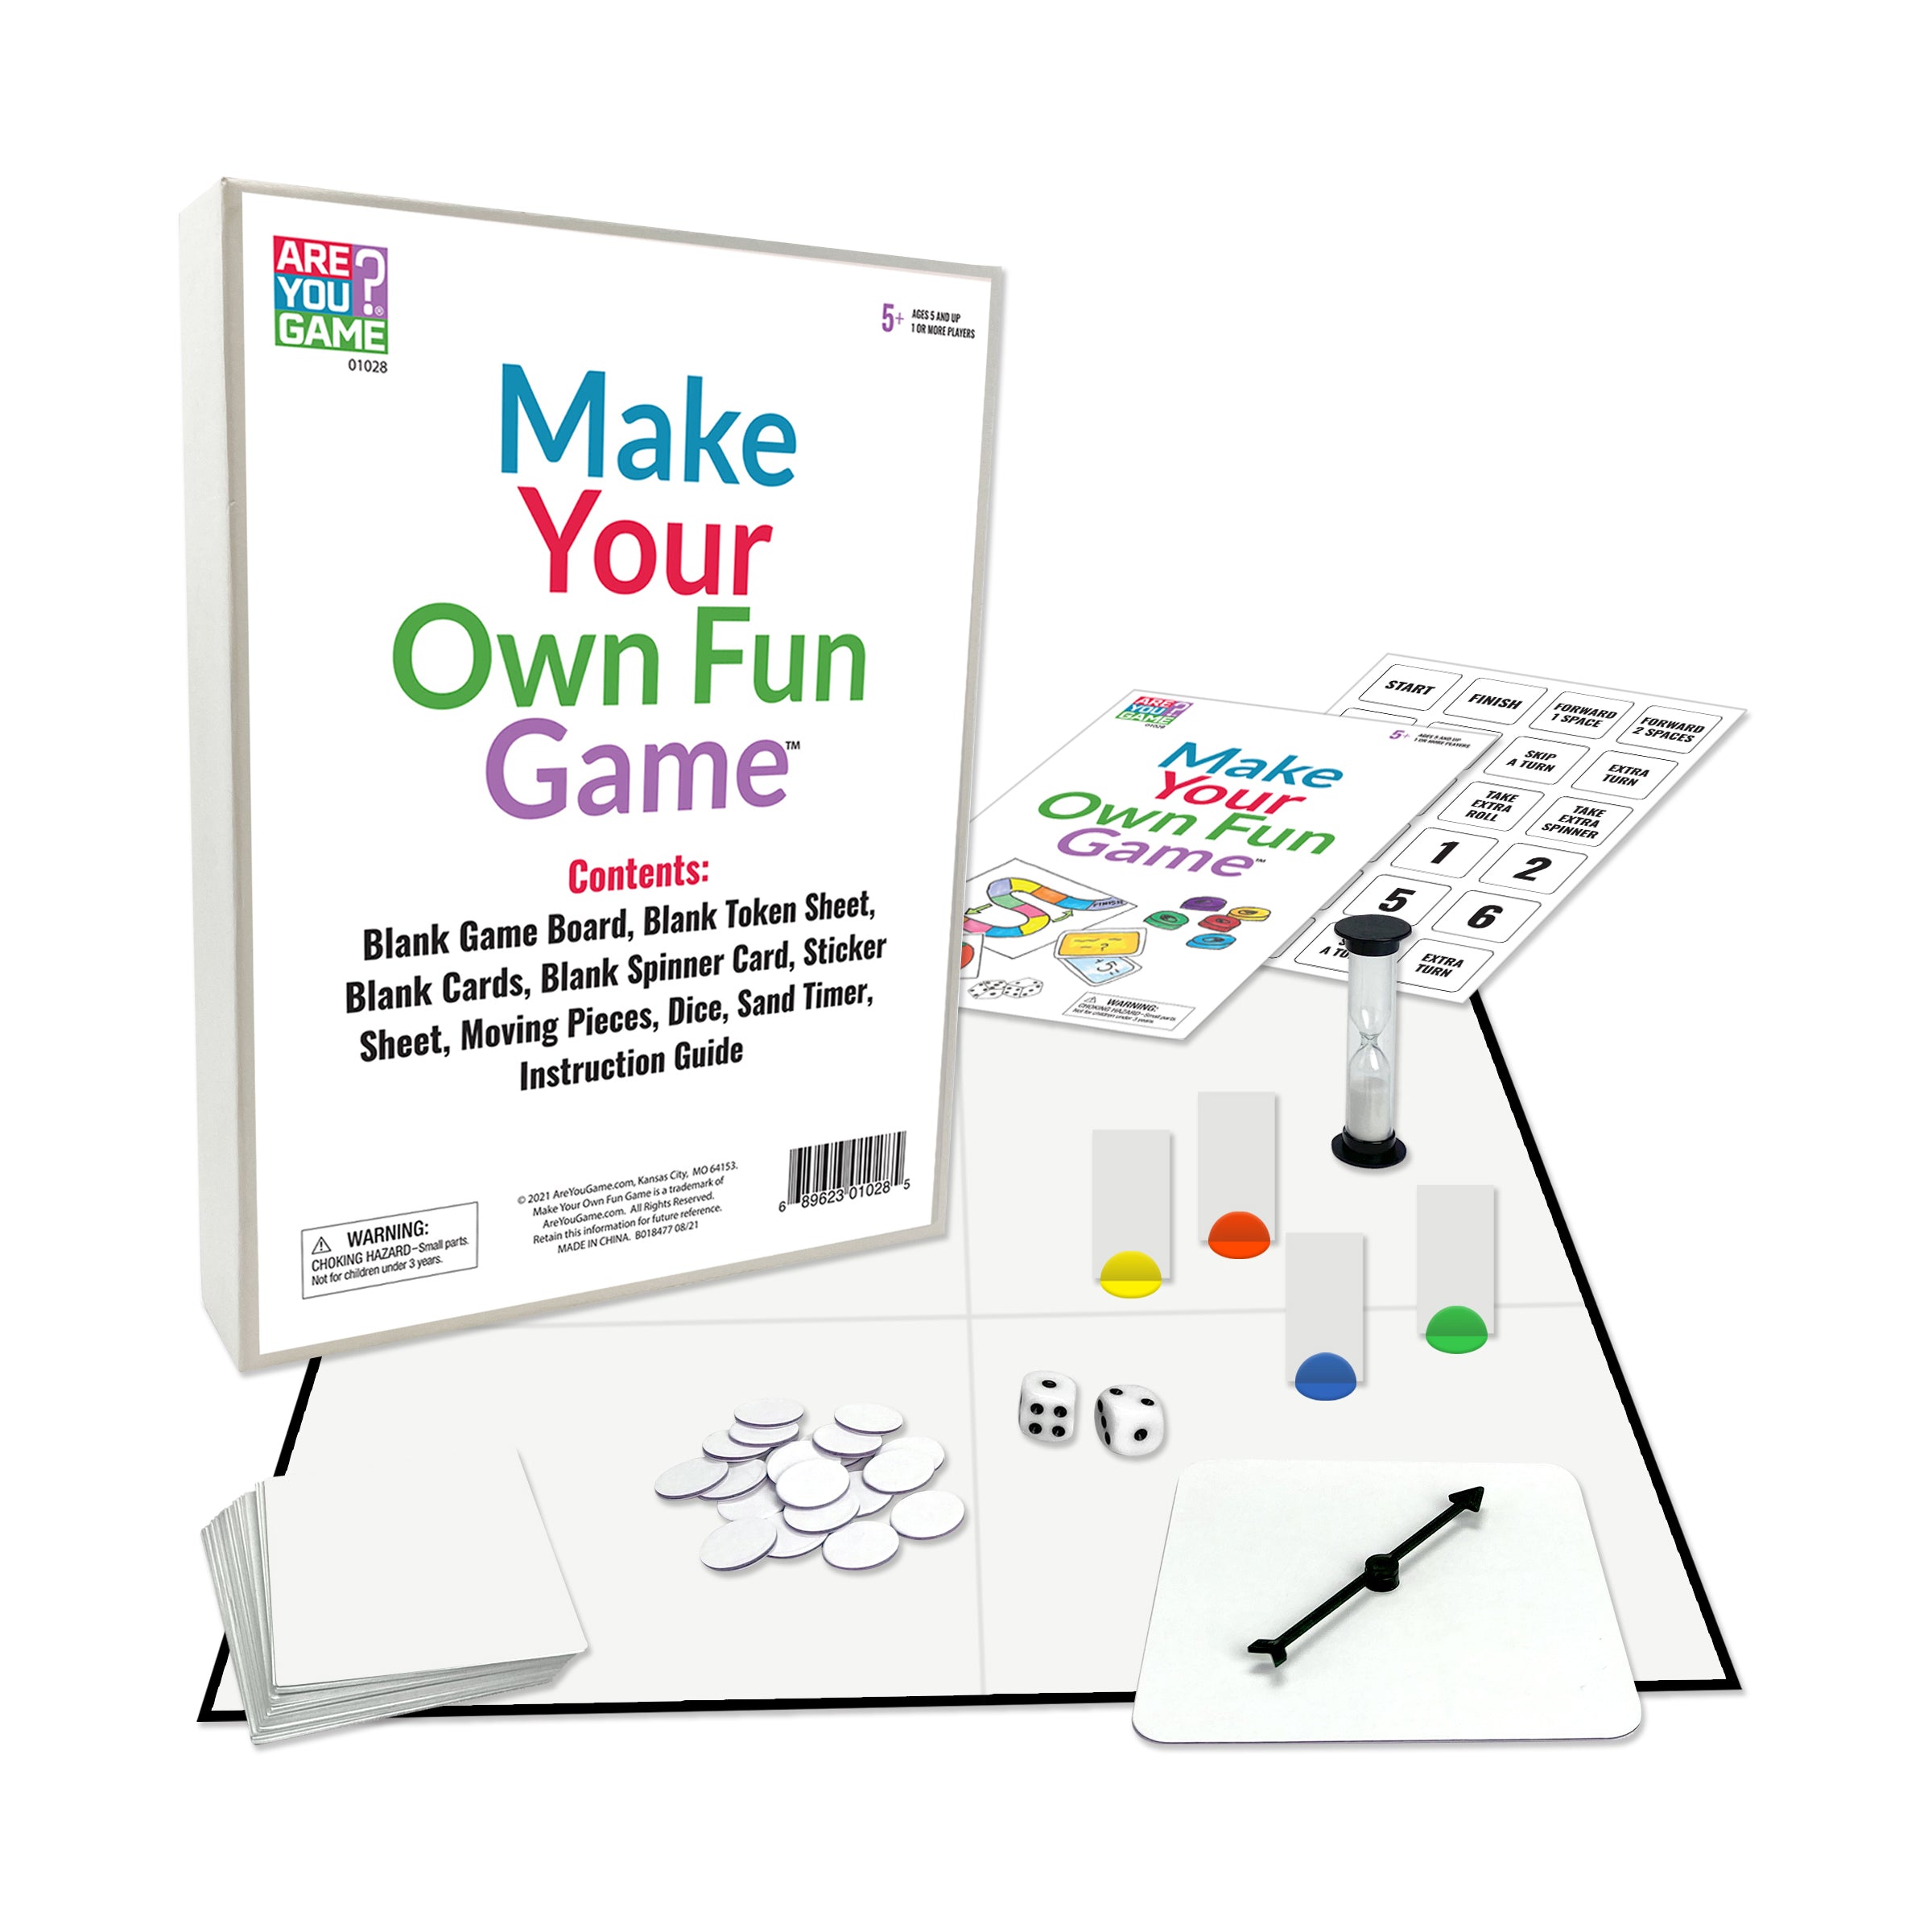 Make your own Video Games for Kids!